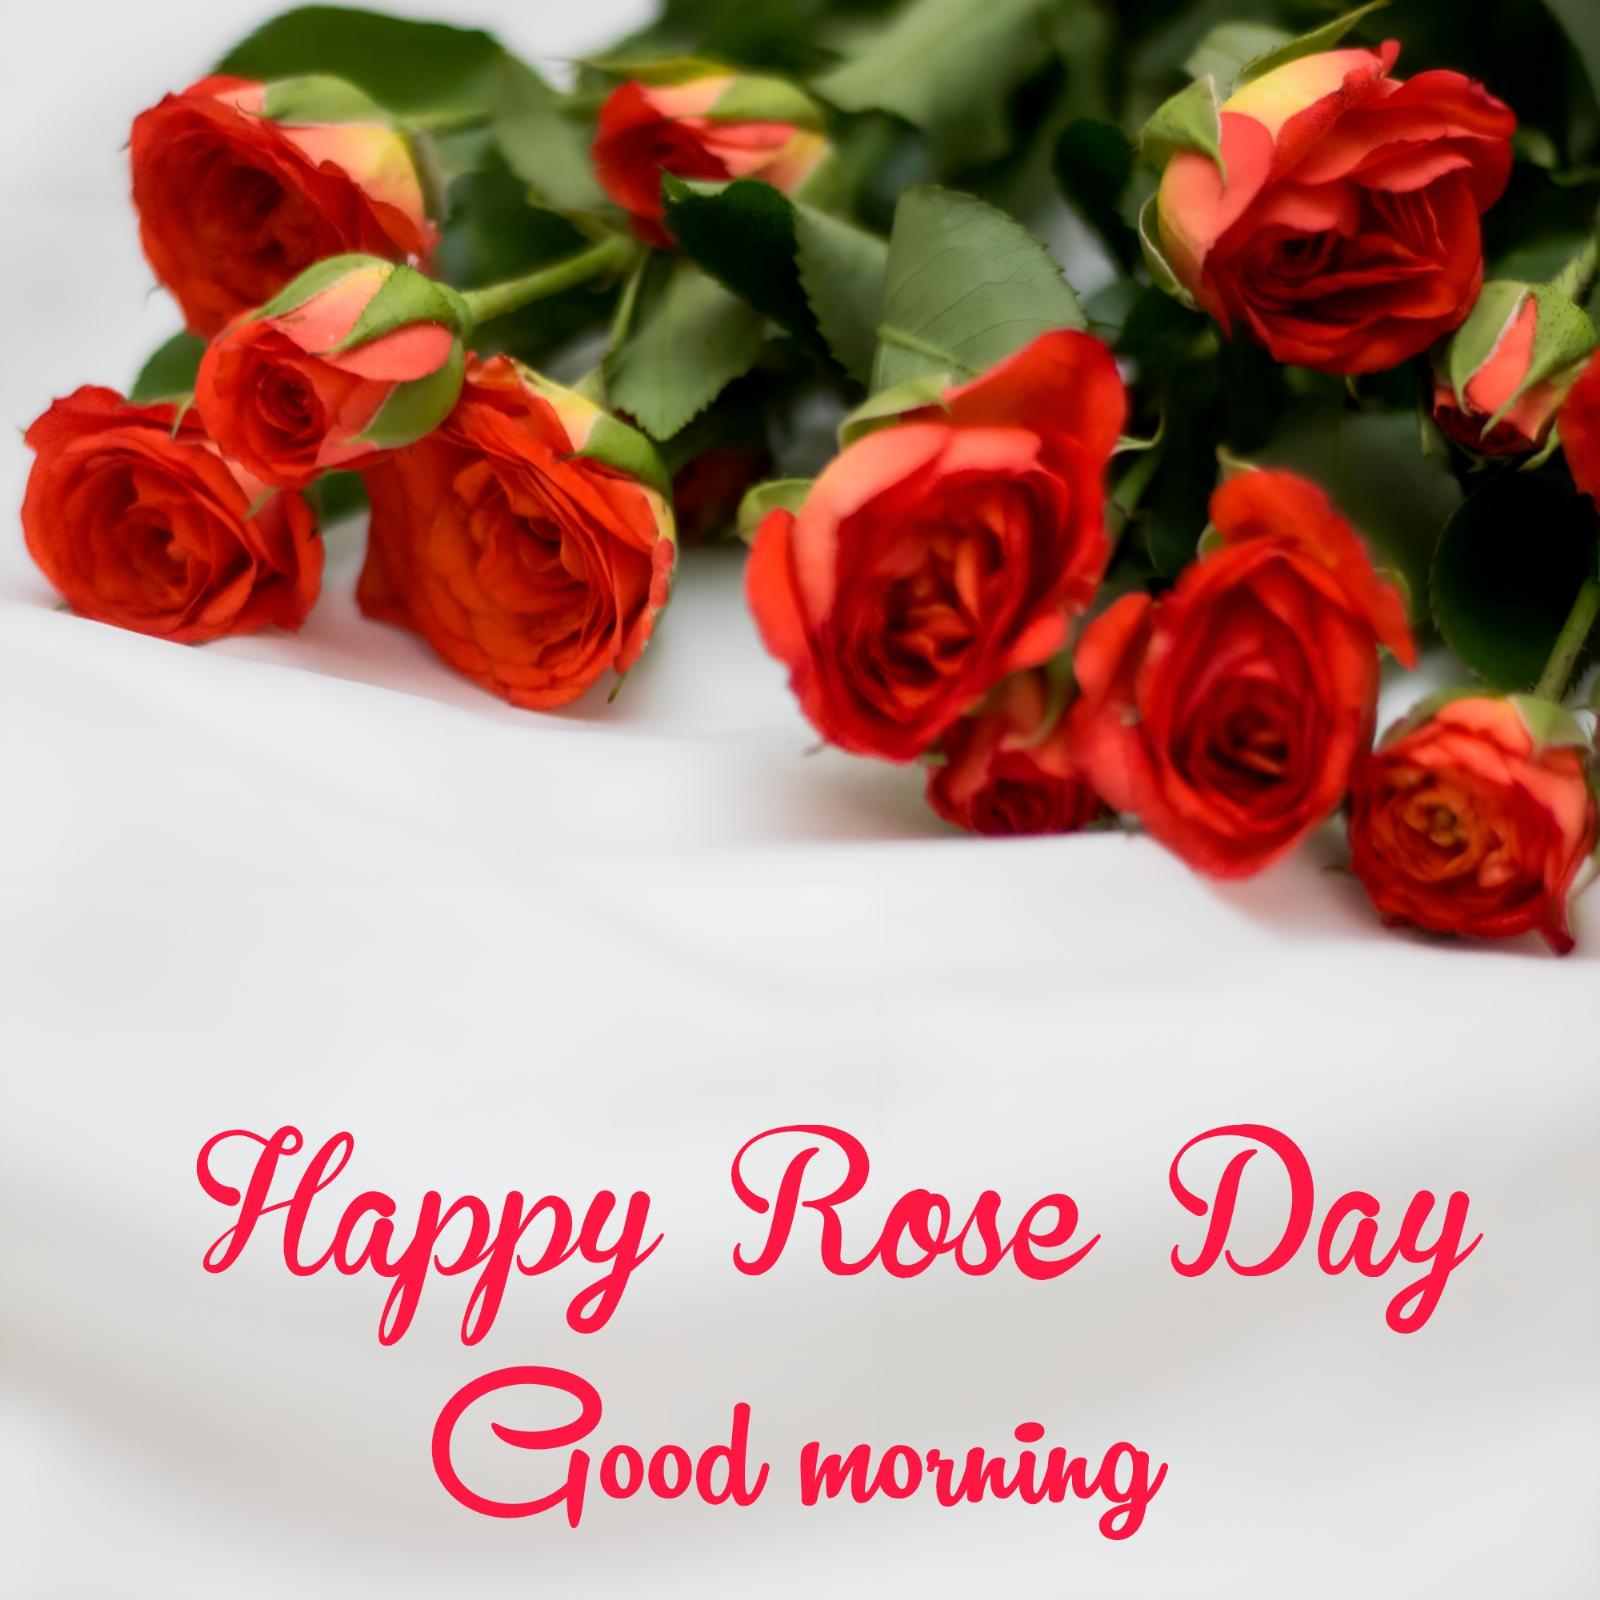 Happy Rose Day Good Morning Images